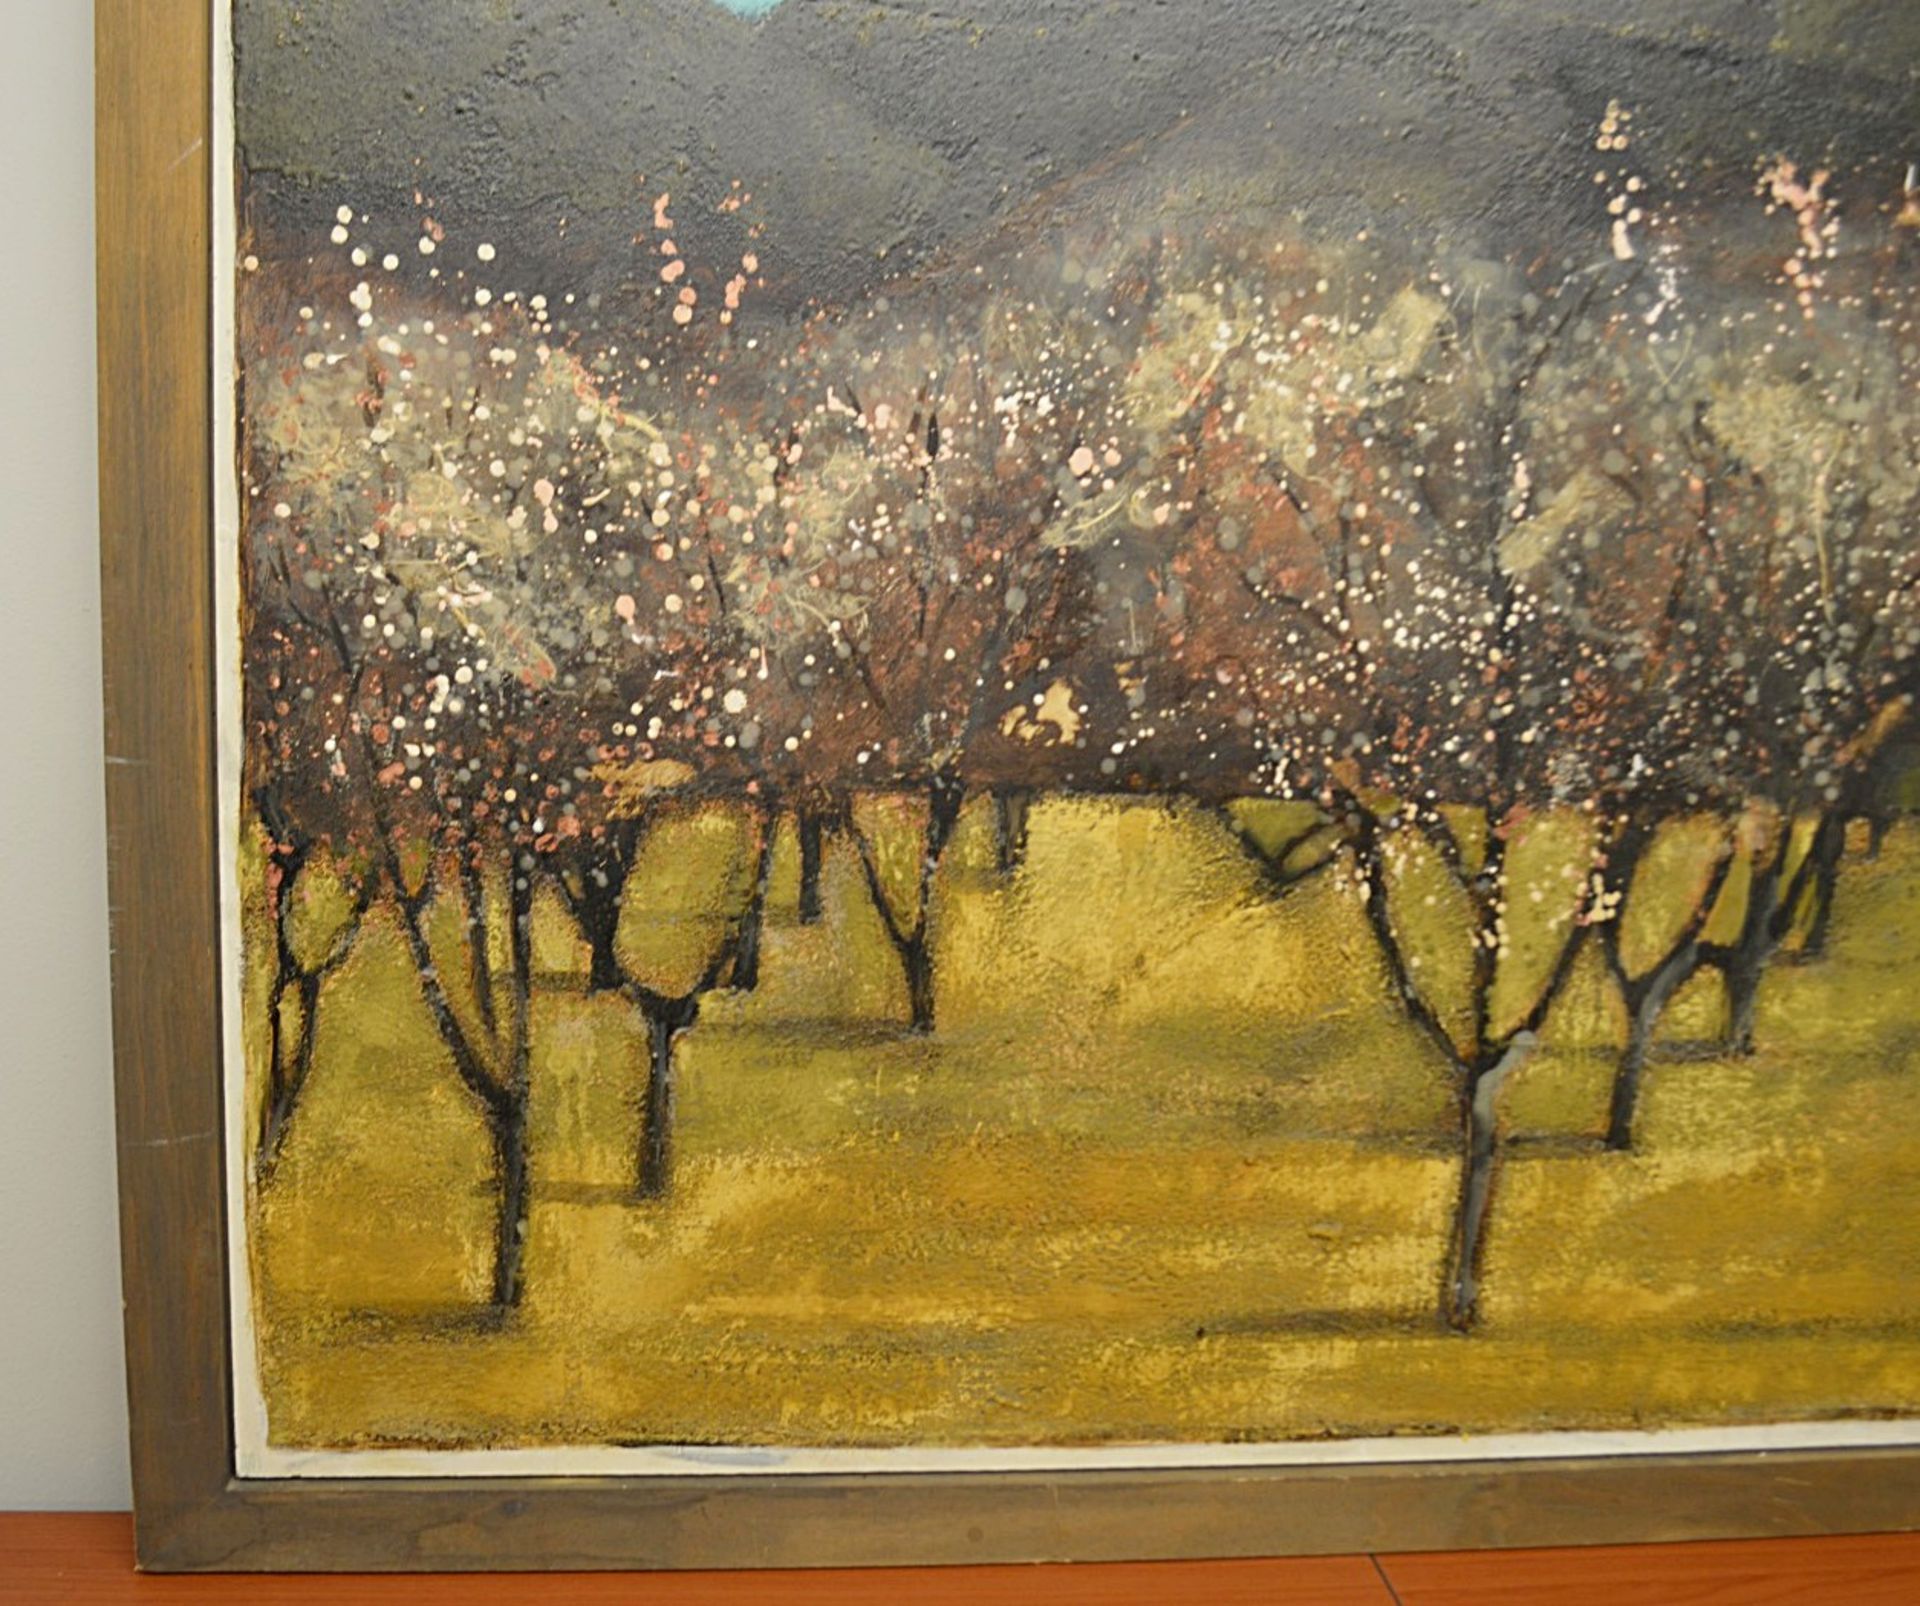 1 x Original Signed Framed Painting Of A Spanish Orchard By Lydia Bauman (1997) - Dimensions: 122 - Image 7 of 8